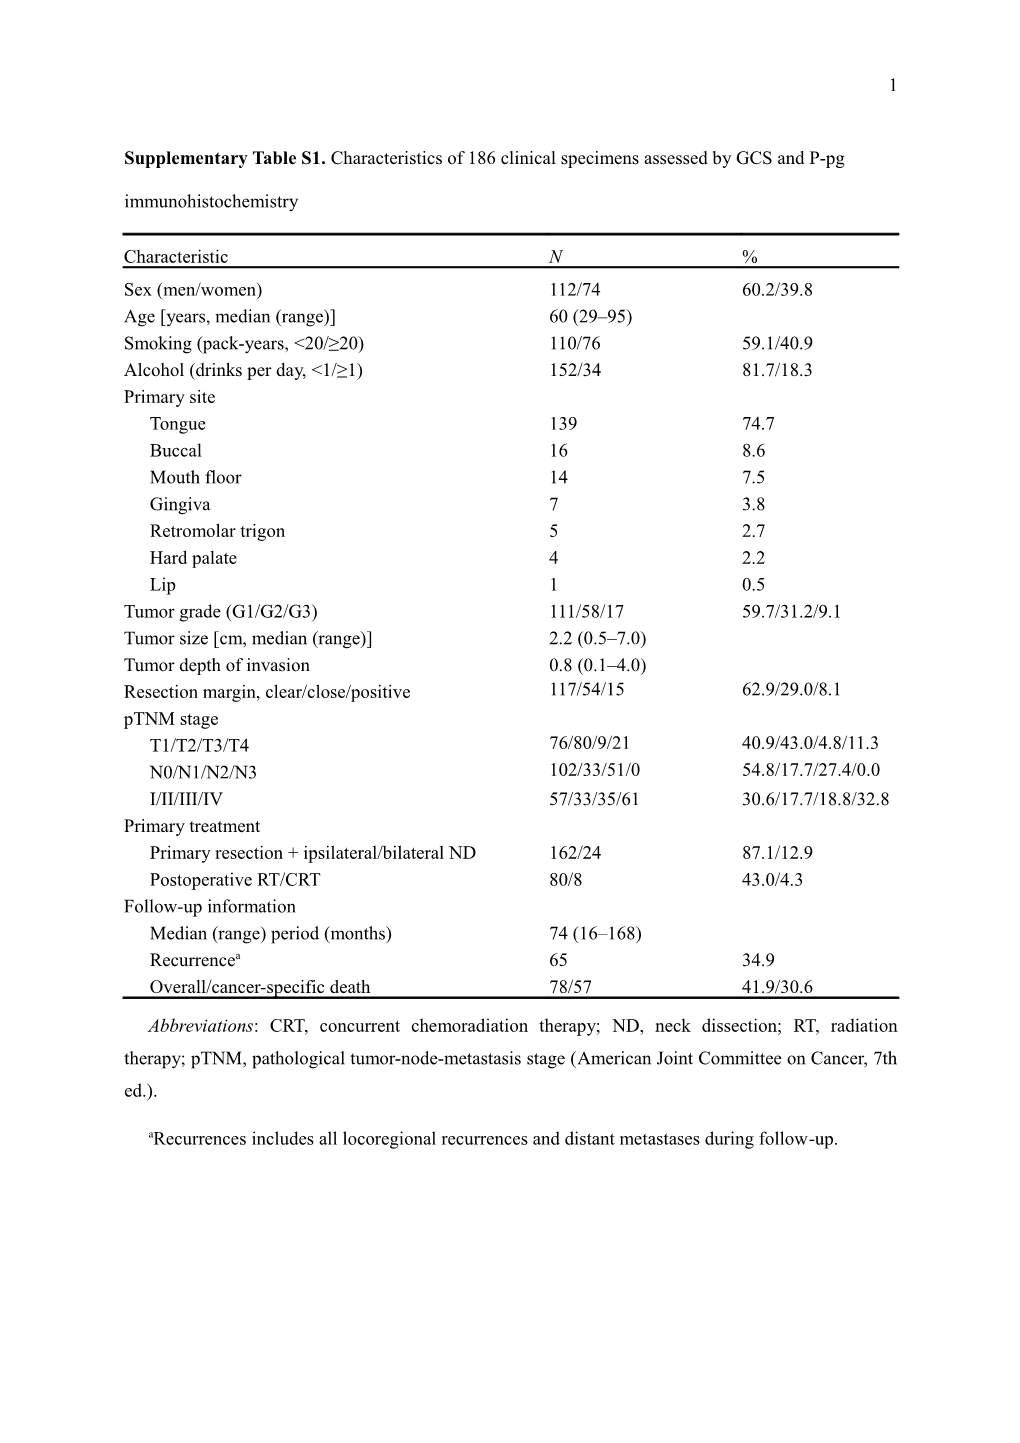 Supplementary Table S1. Characteristics of 186 Clinical Specimens Assessed by GCS And